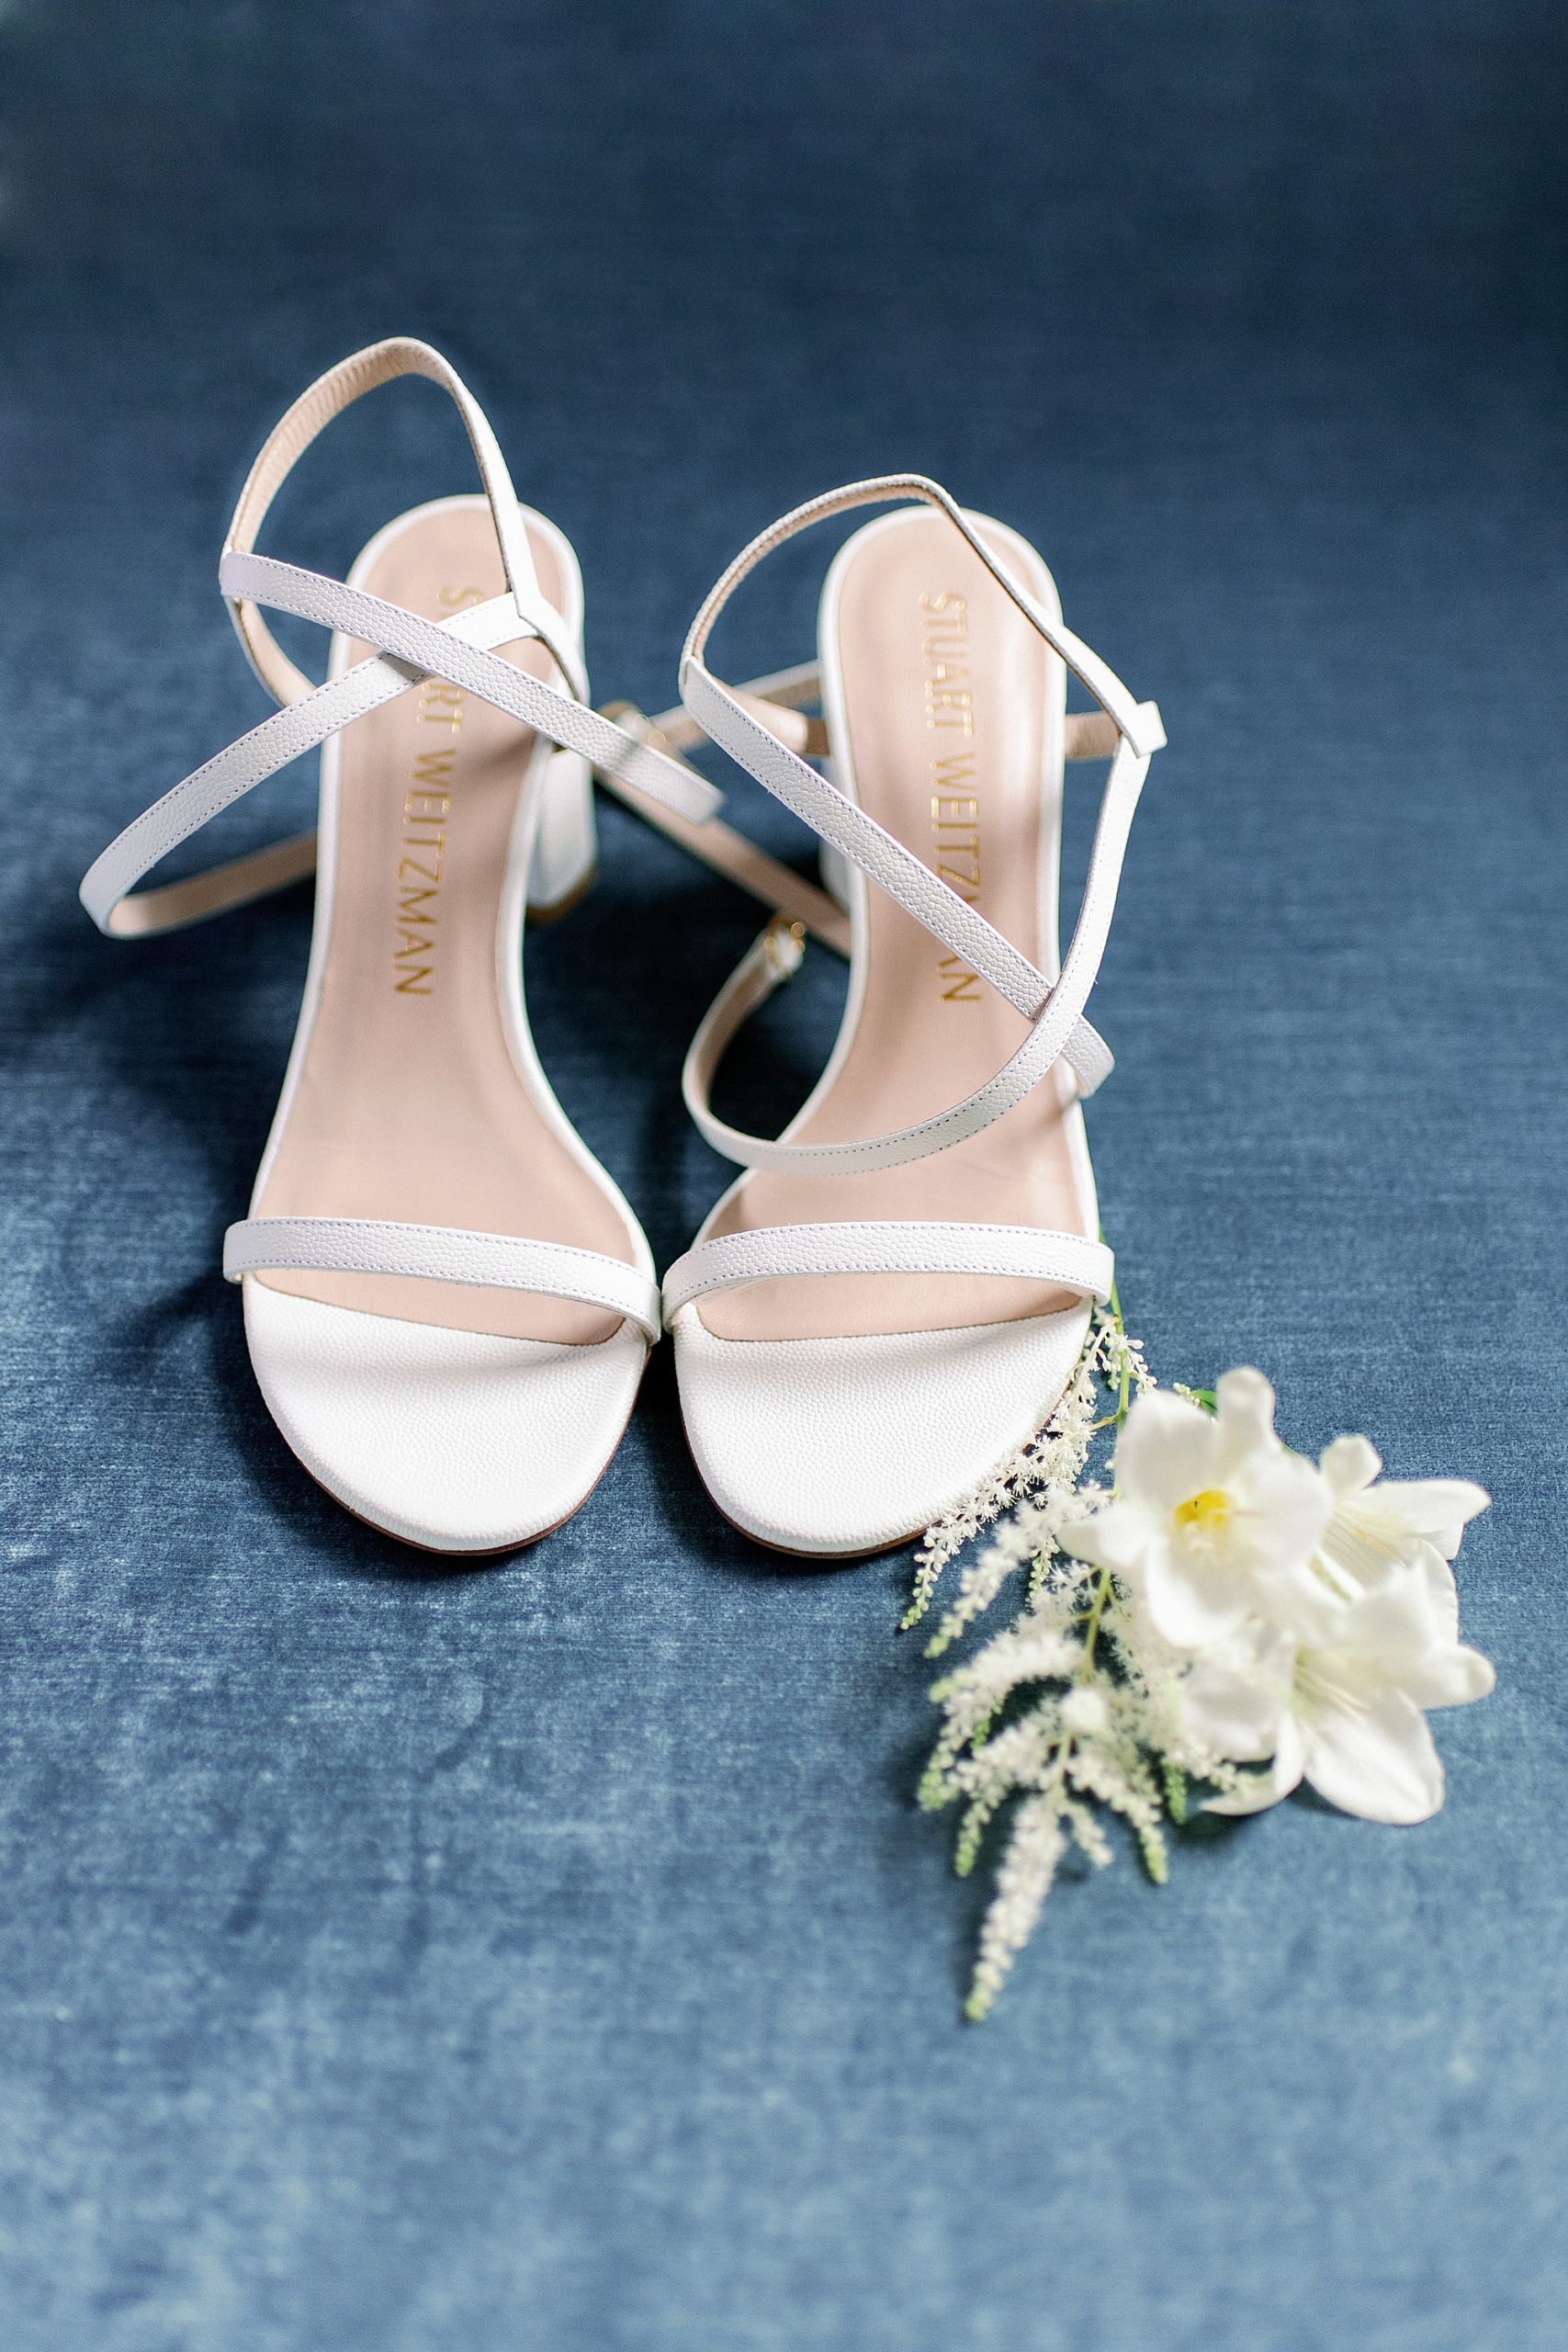 bridal shoes for catskills wedding styled on Locust Mat